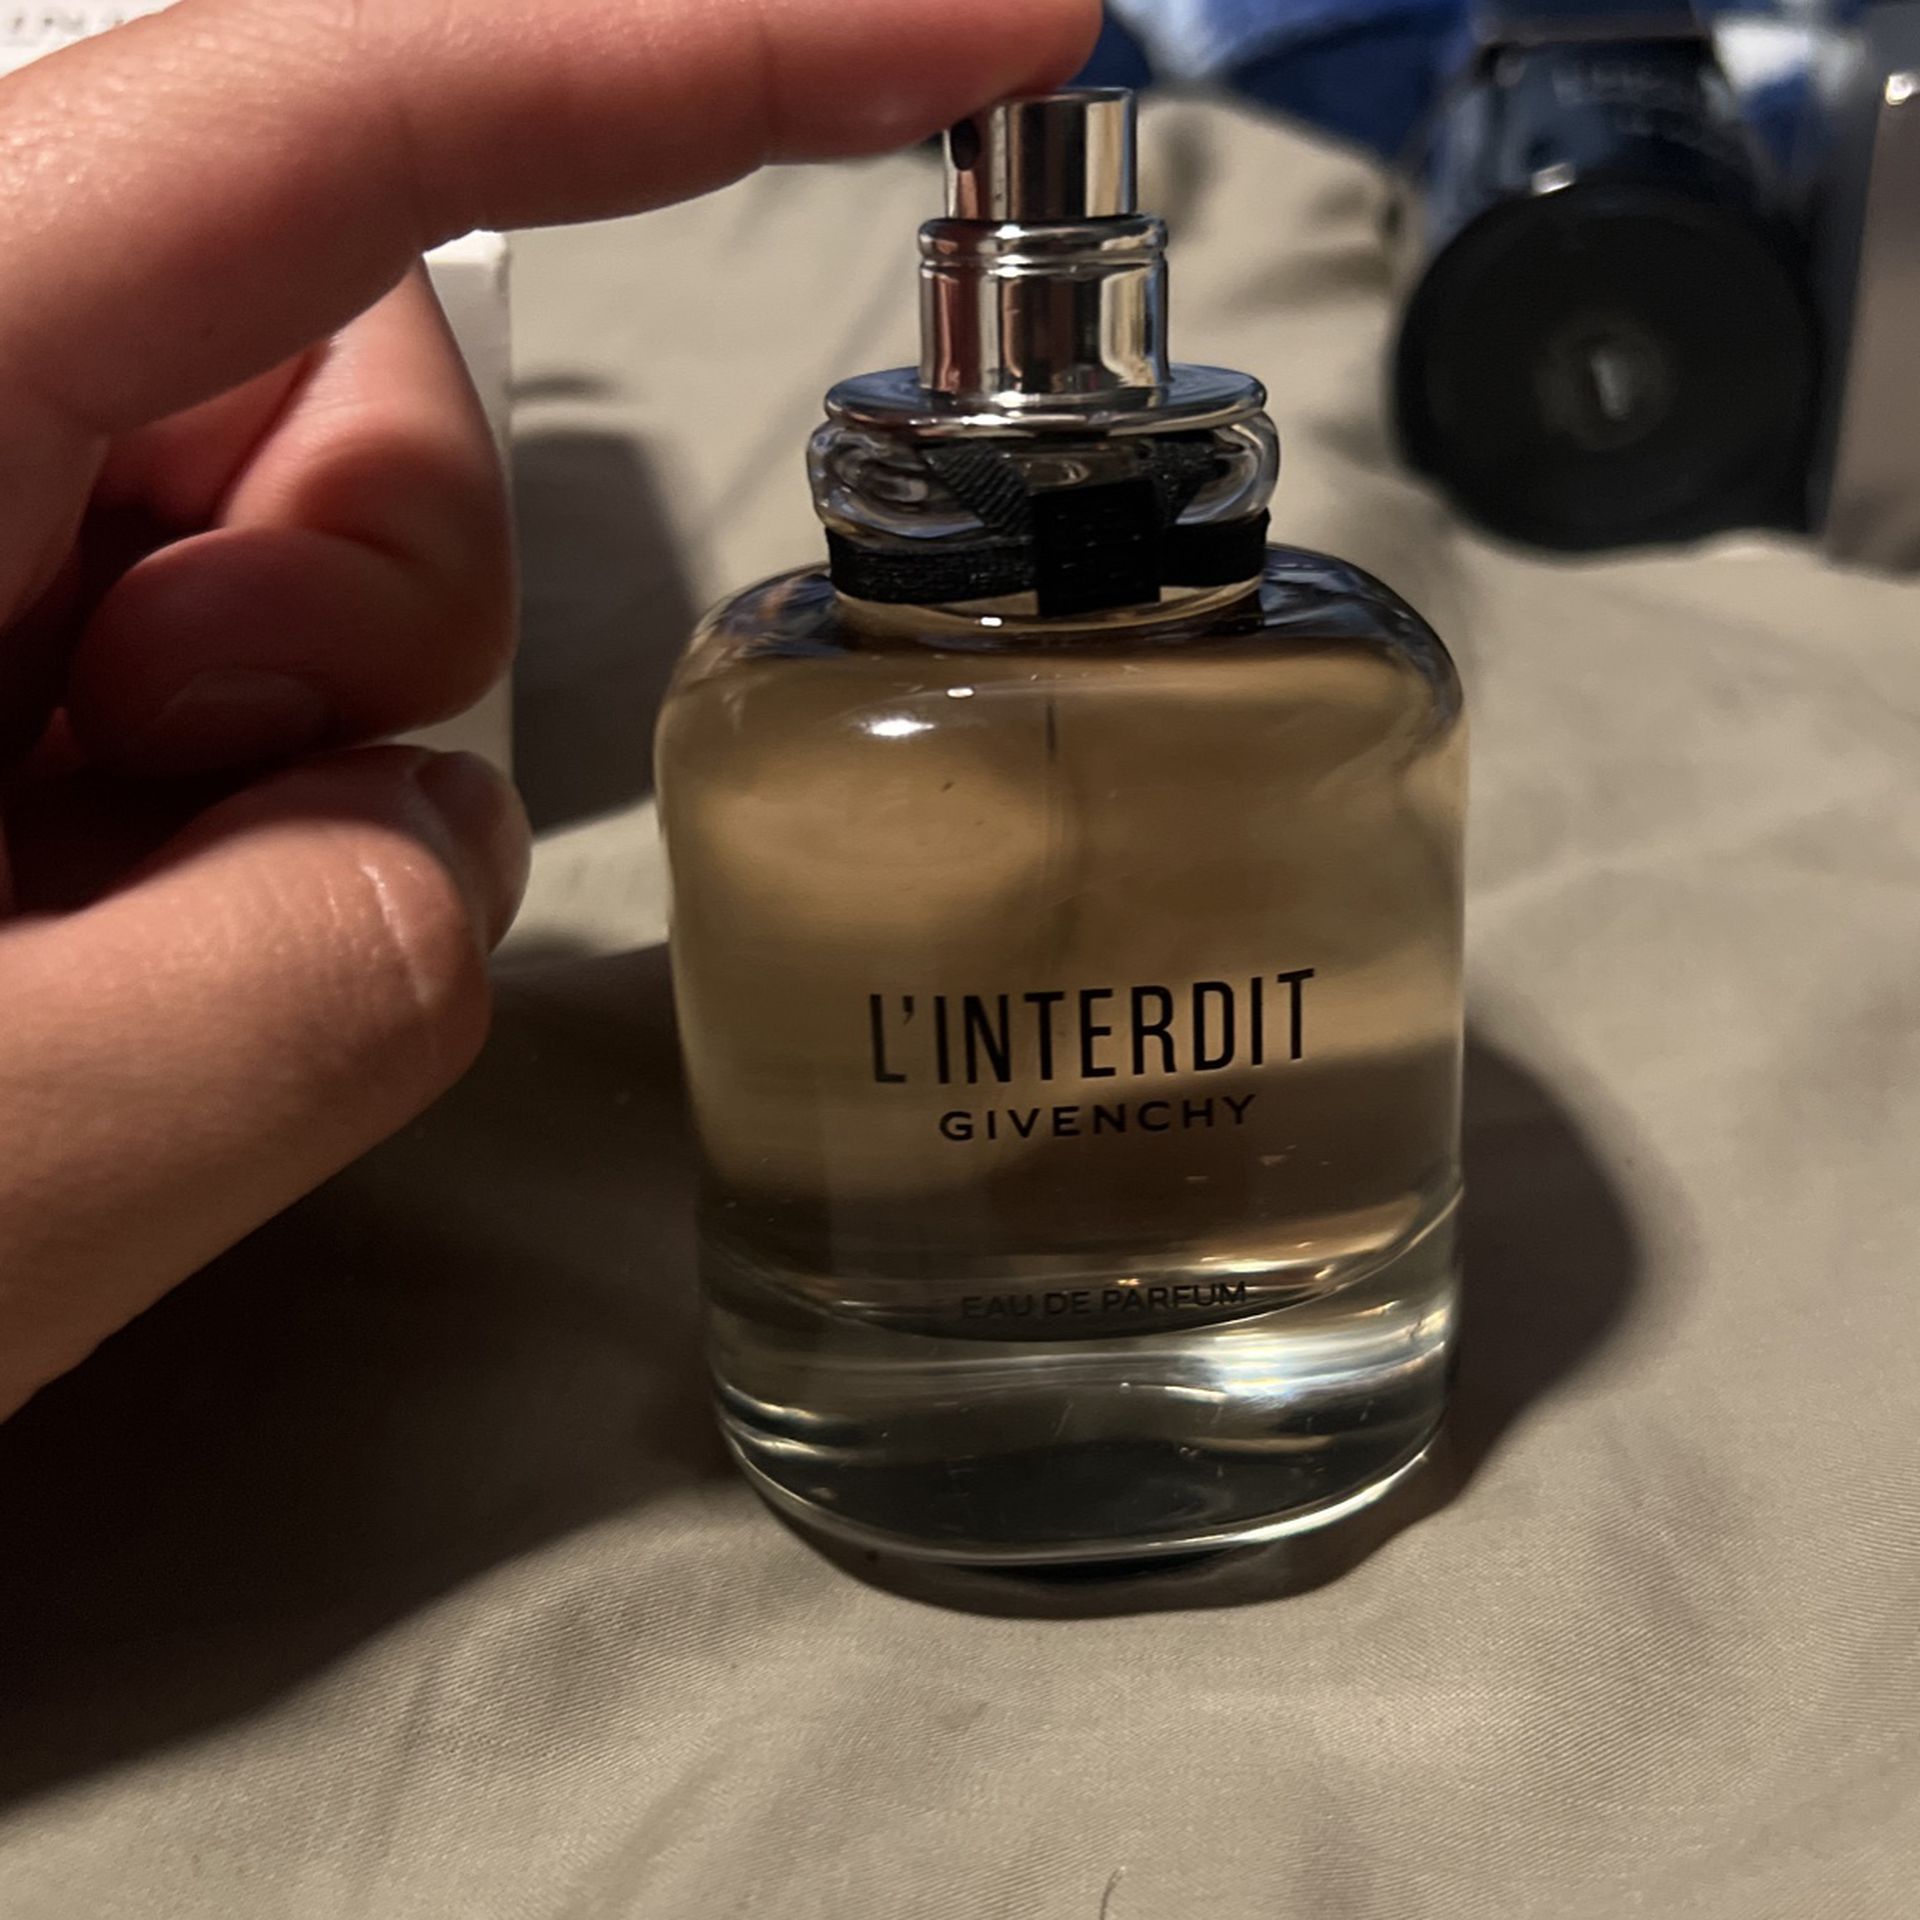 Linterdit Givenchy Ray De Parfum 2.7 Oz for Sale in Irwindale, CA - OfferUp